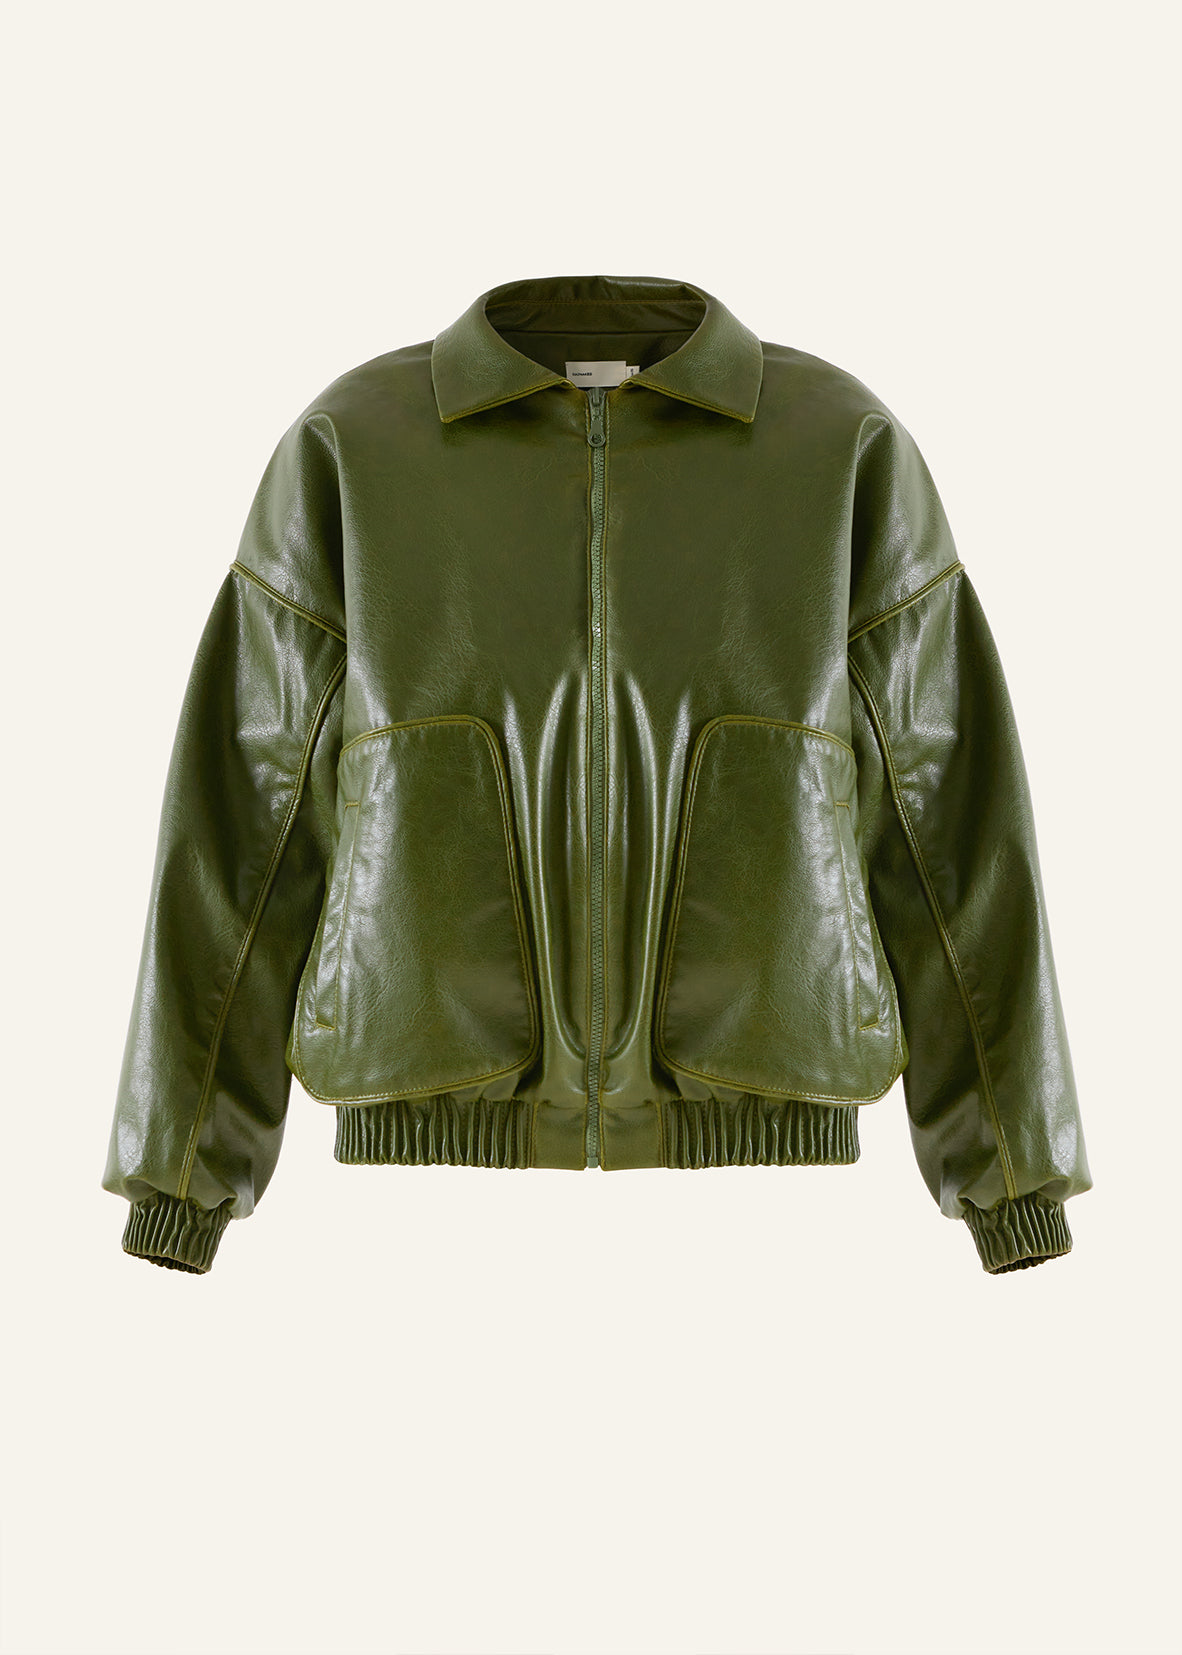 Product photo of a green vegan leather oversized bomber